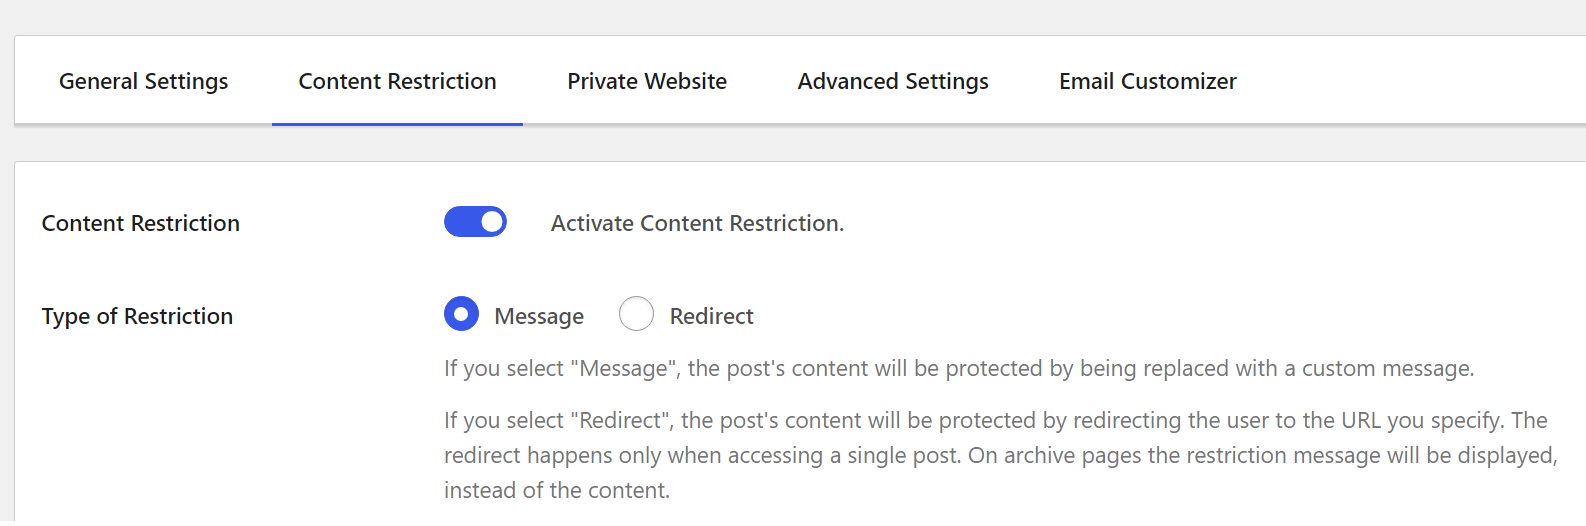 Enabling content restrictions